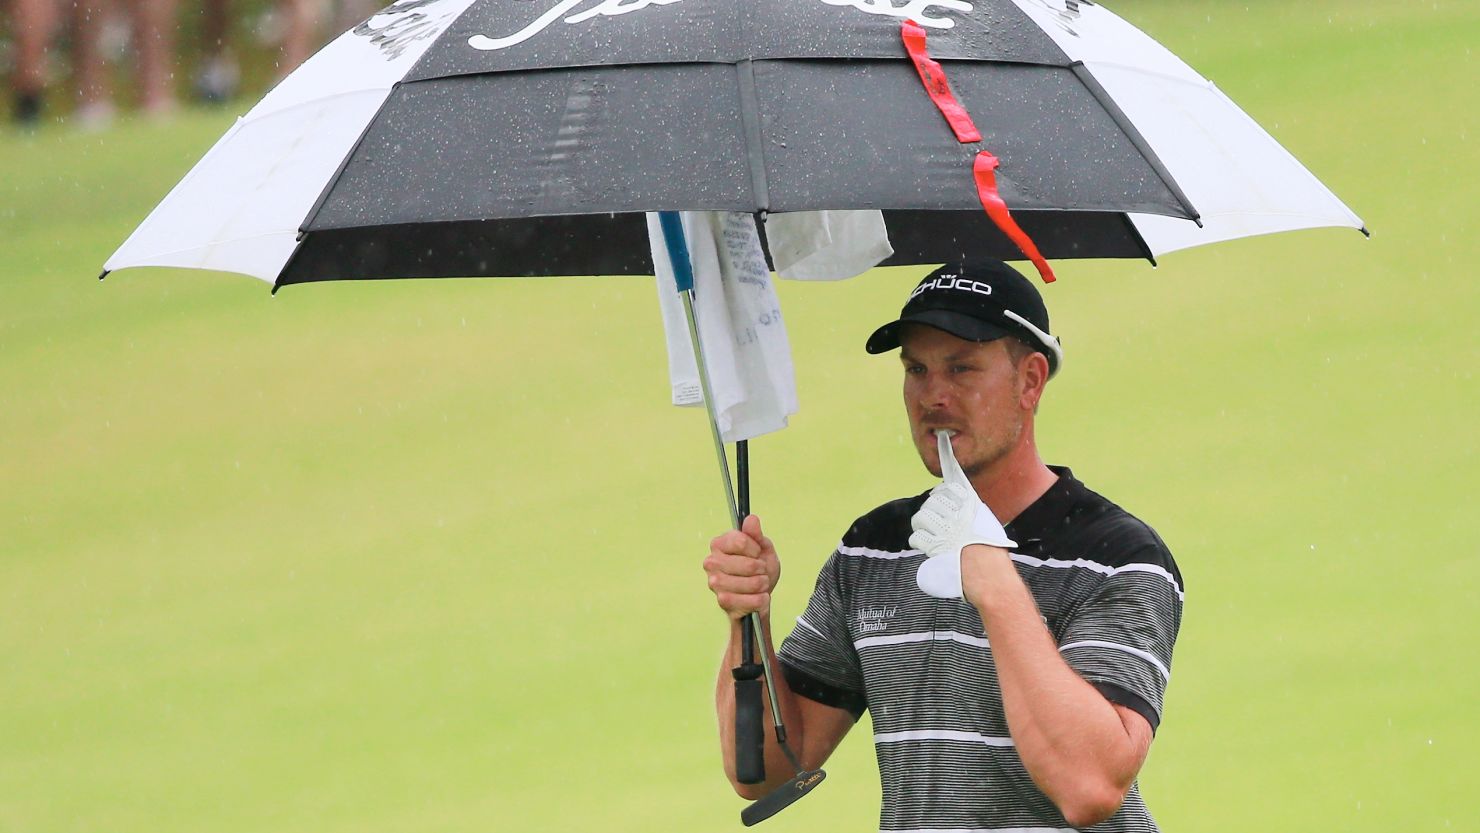 Tour Championship leader Henrik Stenson struggled to cope as wet weather hit the field during Saturday's third round. 